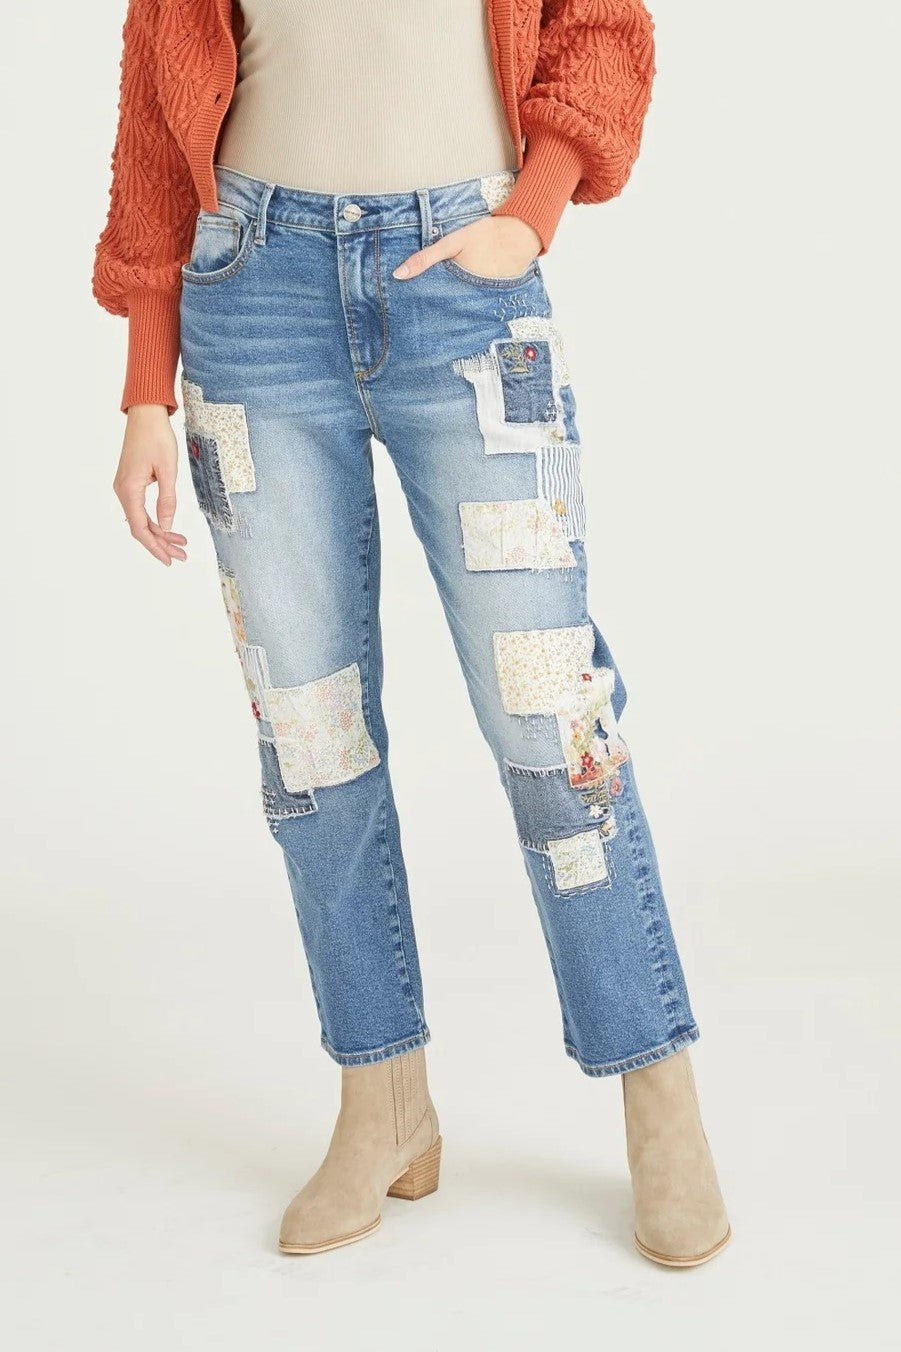 Royce Chaos Patchwork Jean